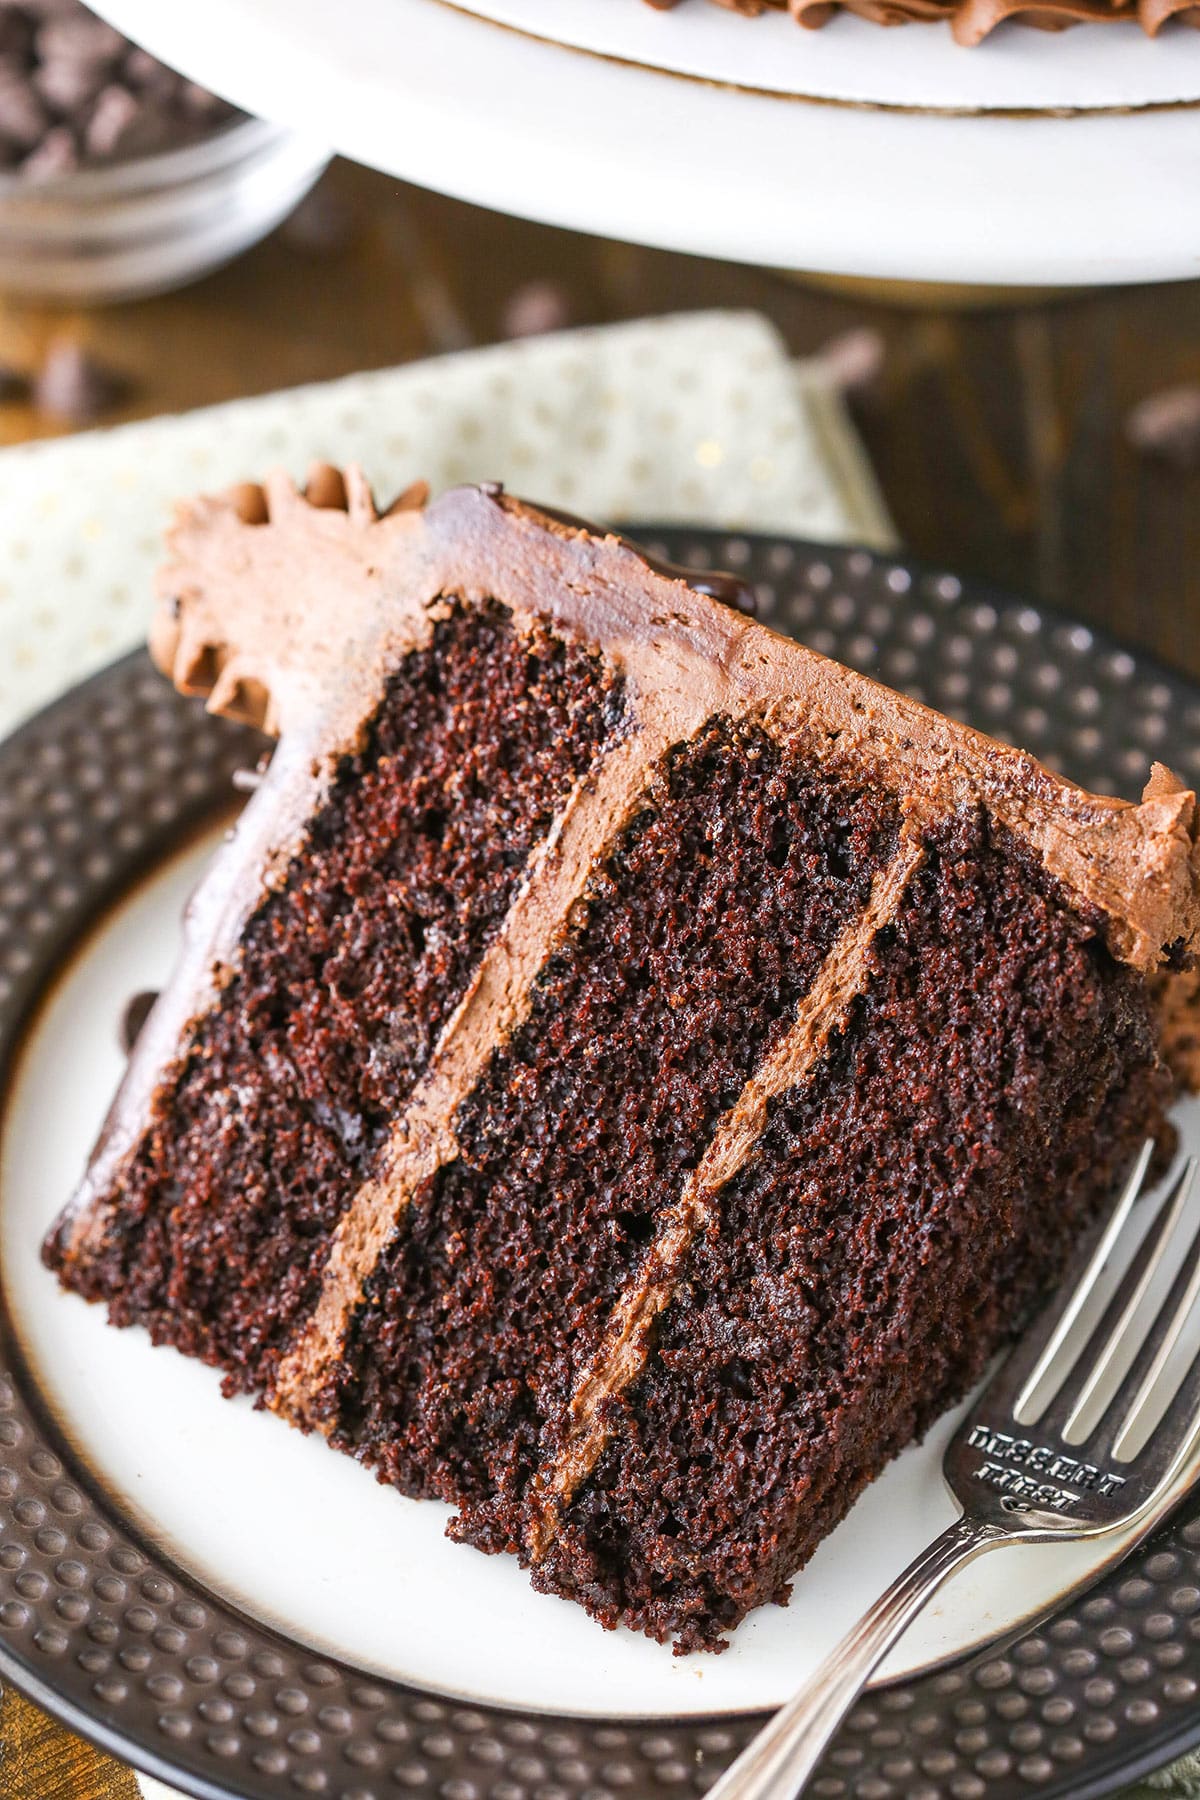 A slice of layered chocolate cake on a plate